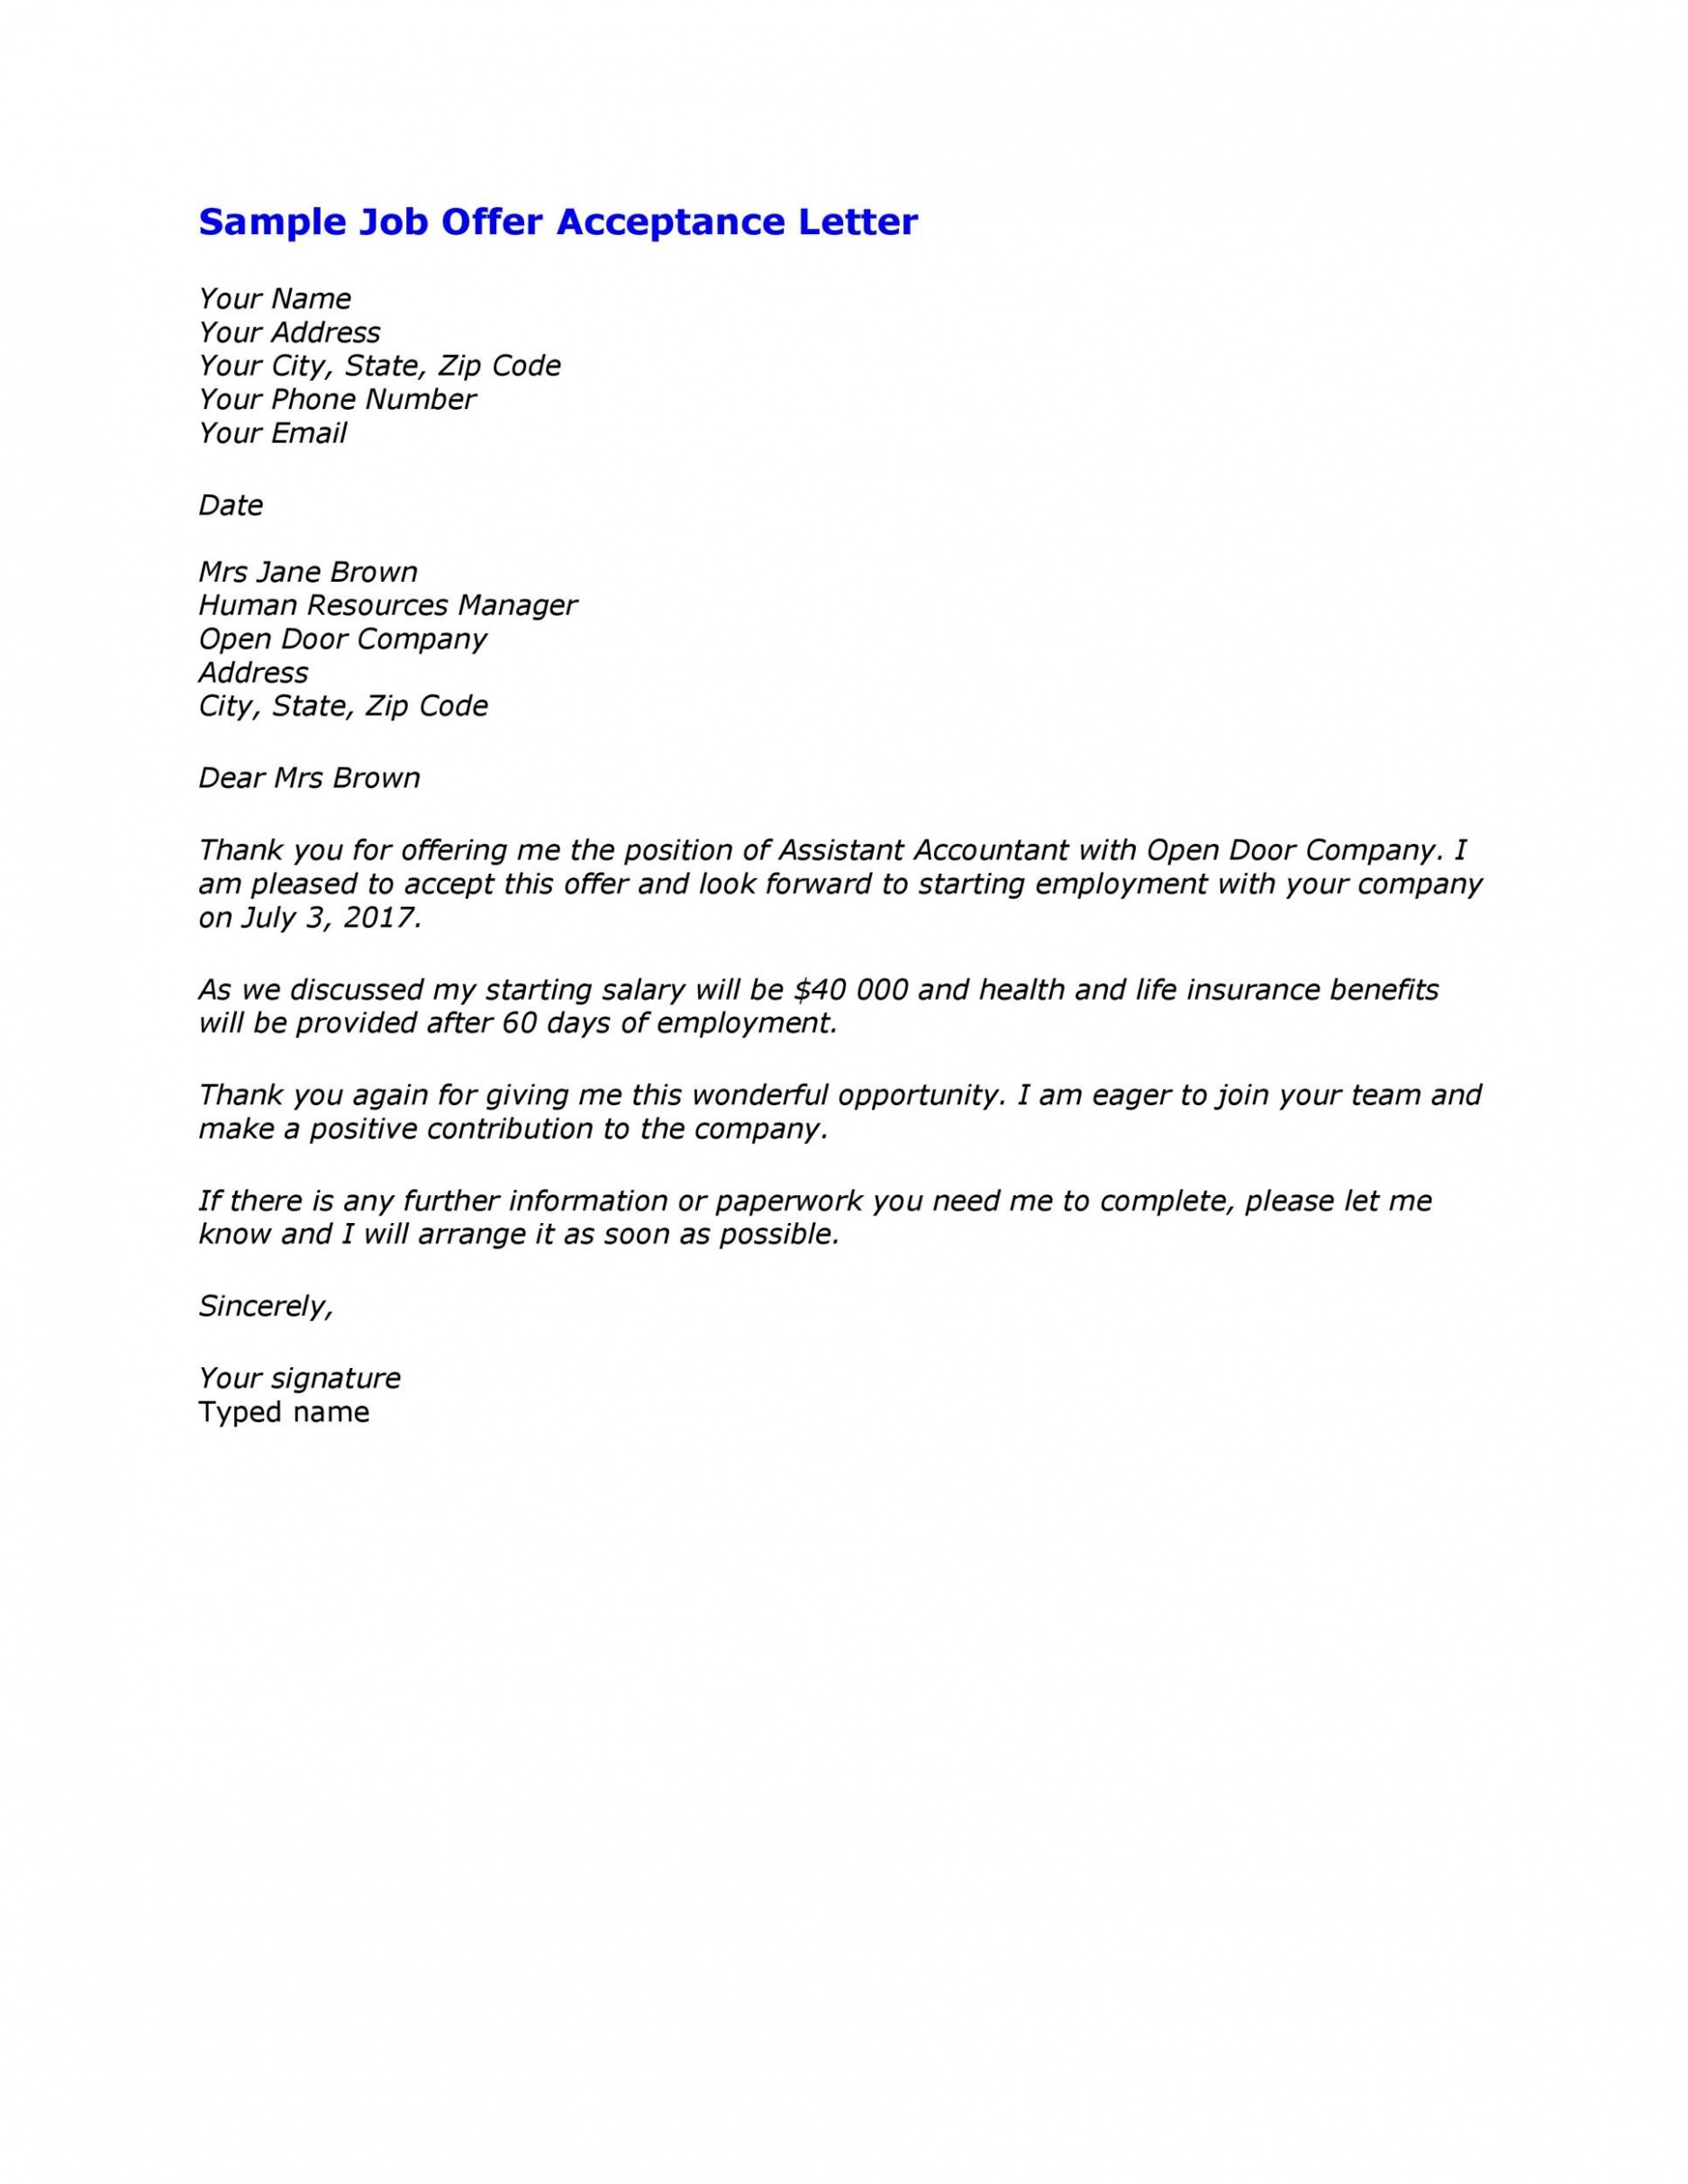 Free Job Offer Acceptance Letter Template Doc